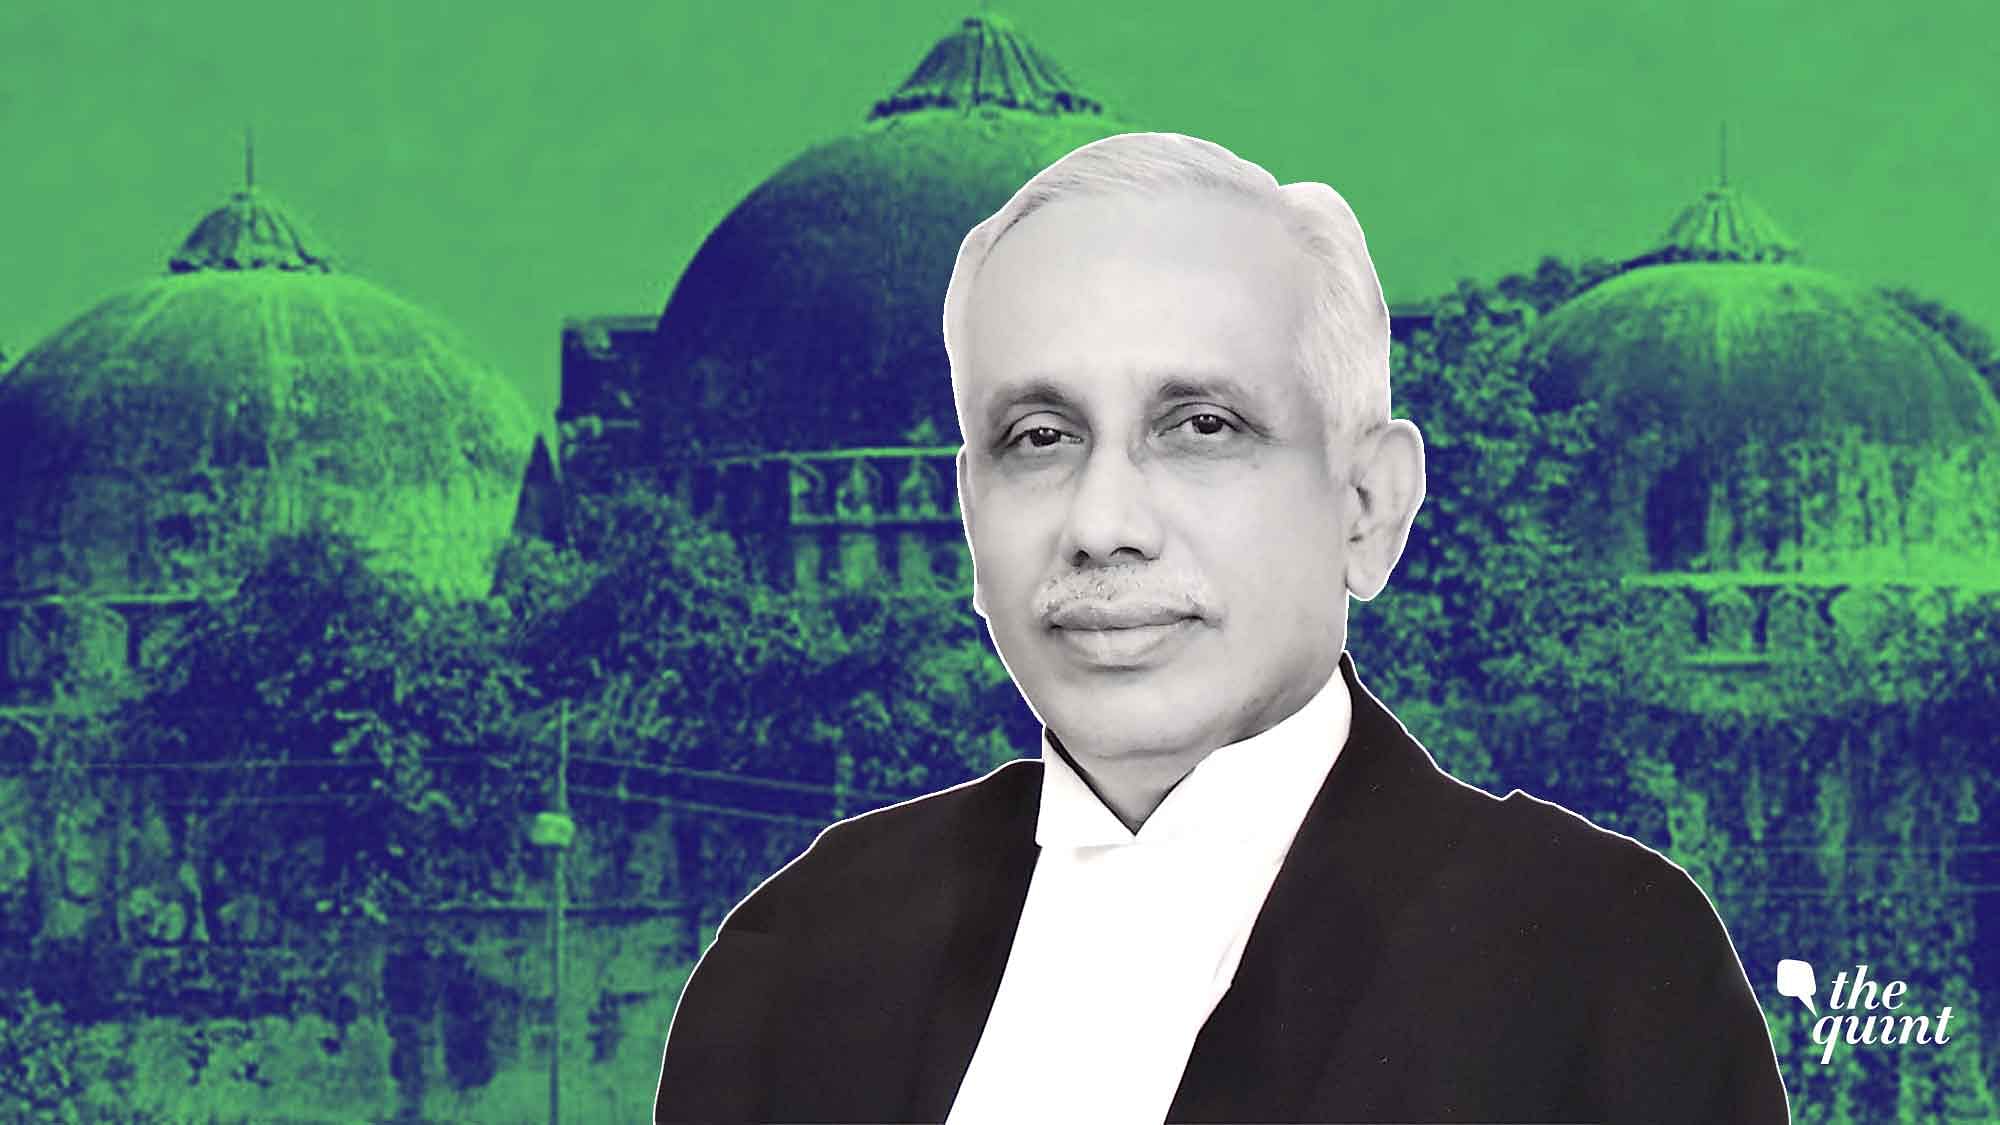  Justice Nazeer’s identity makes him profoundly aware of the importance of this case not just for the parties or the Supreme Court but for the future of India as well.